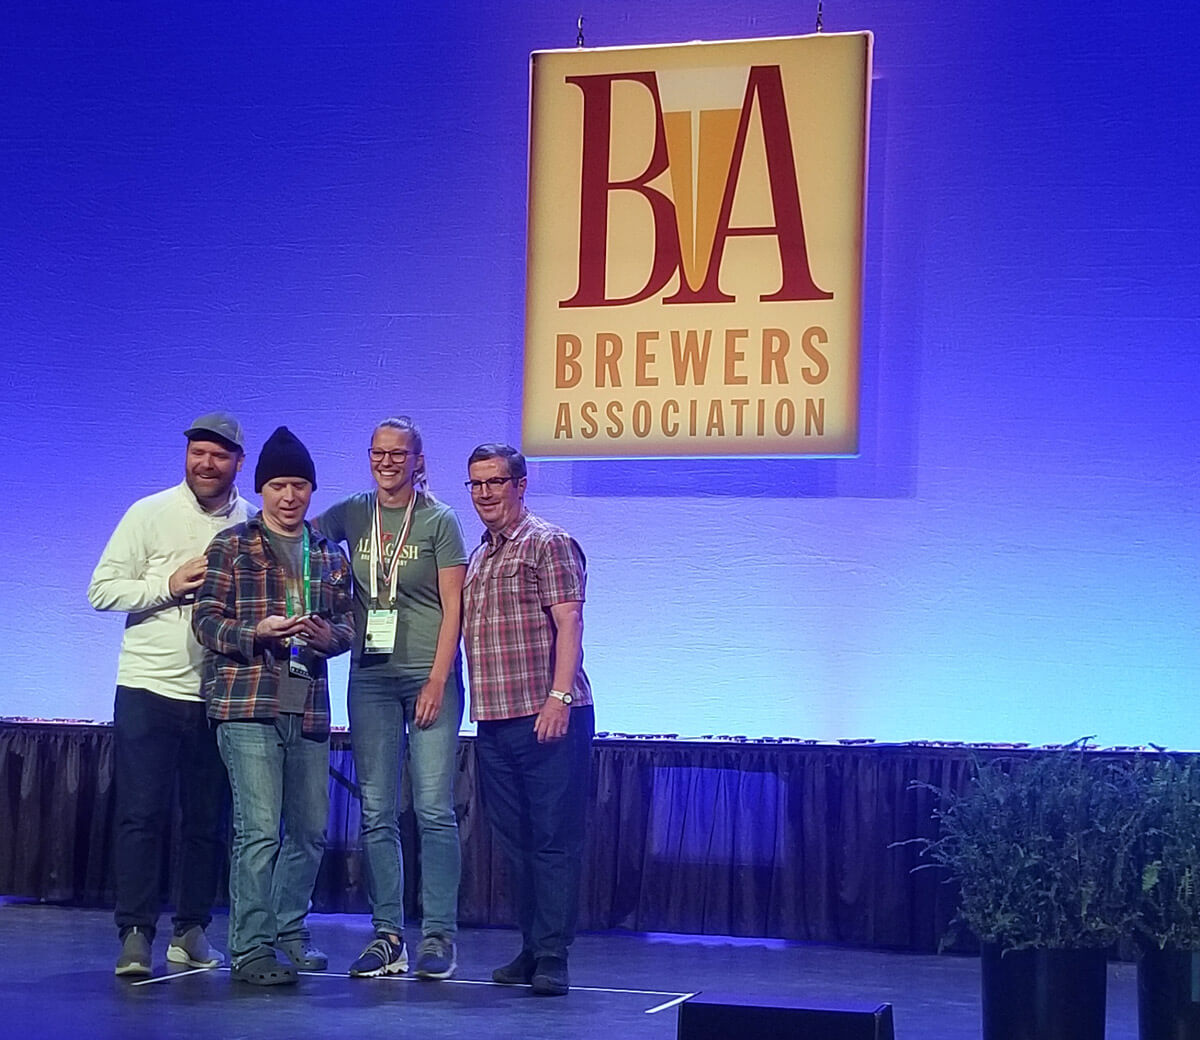 Cheers to the Winners at GABF! Brewing With Briess